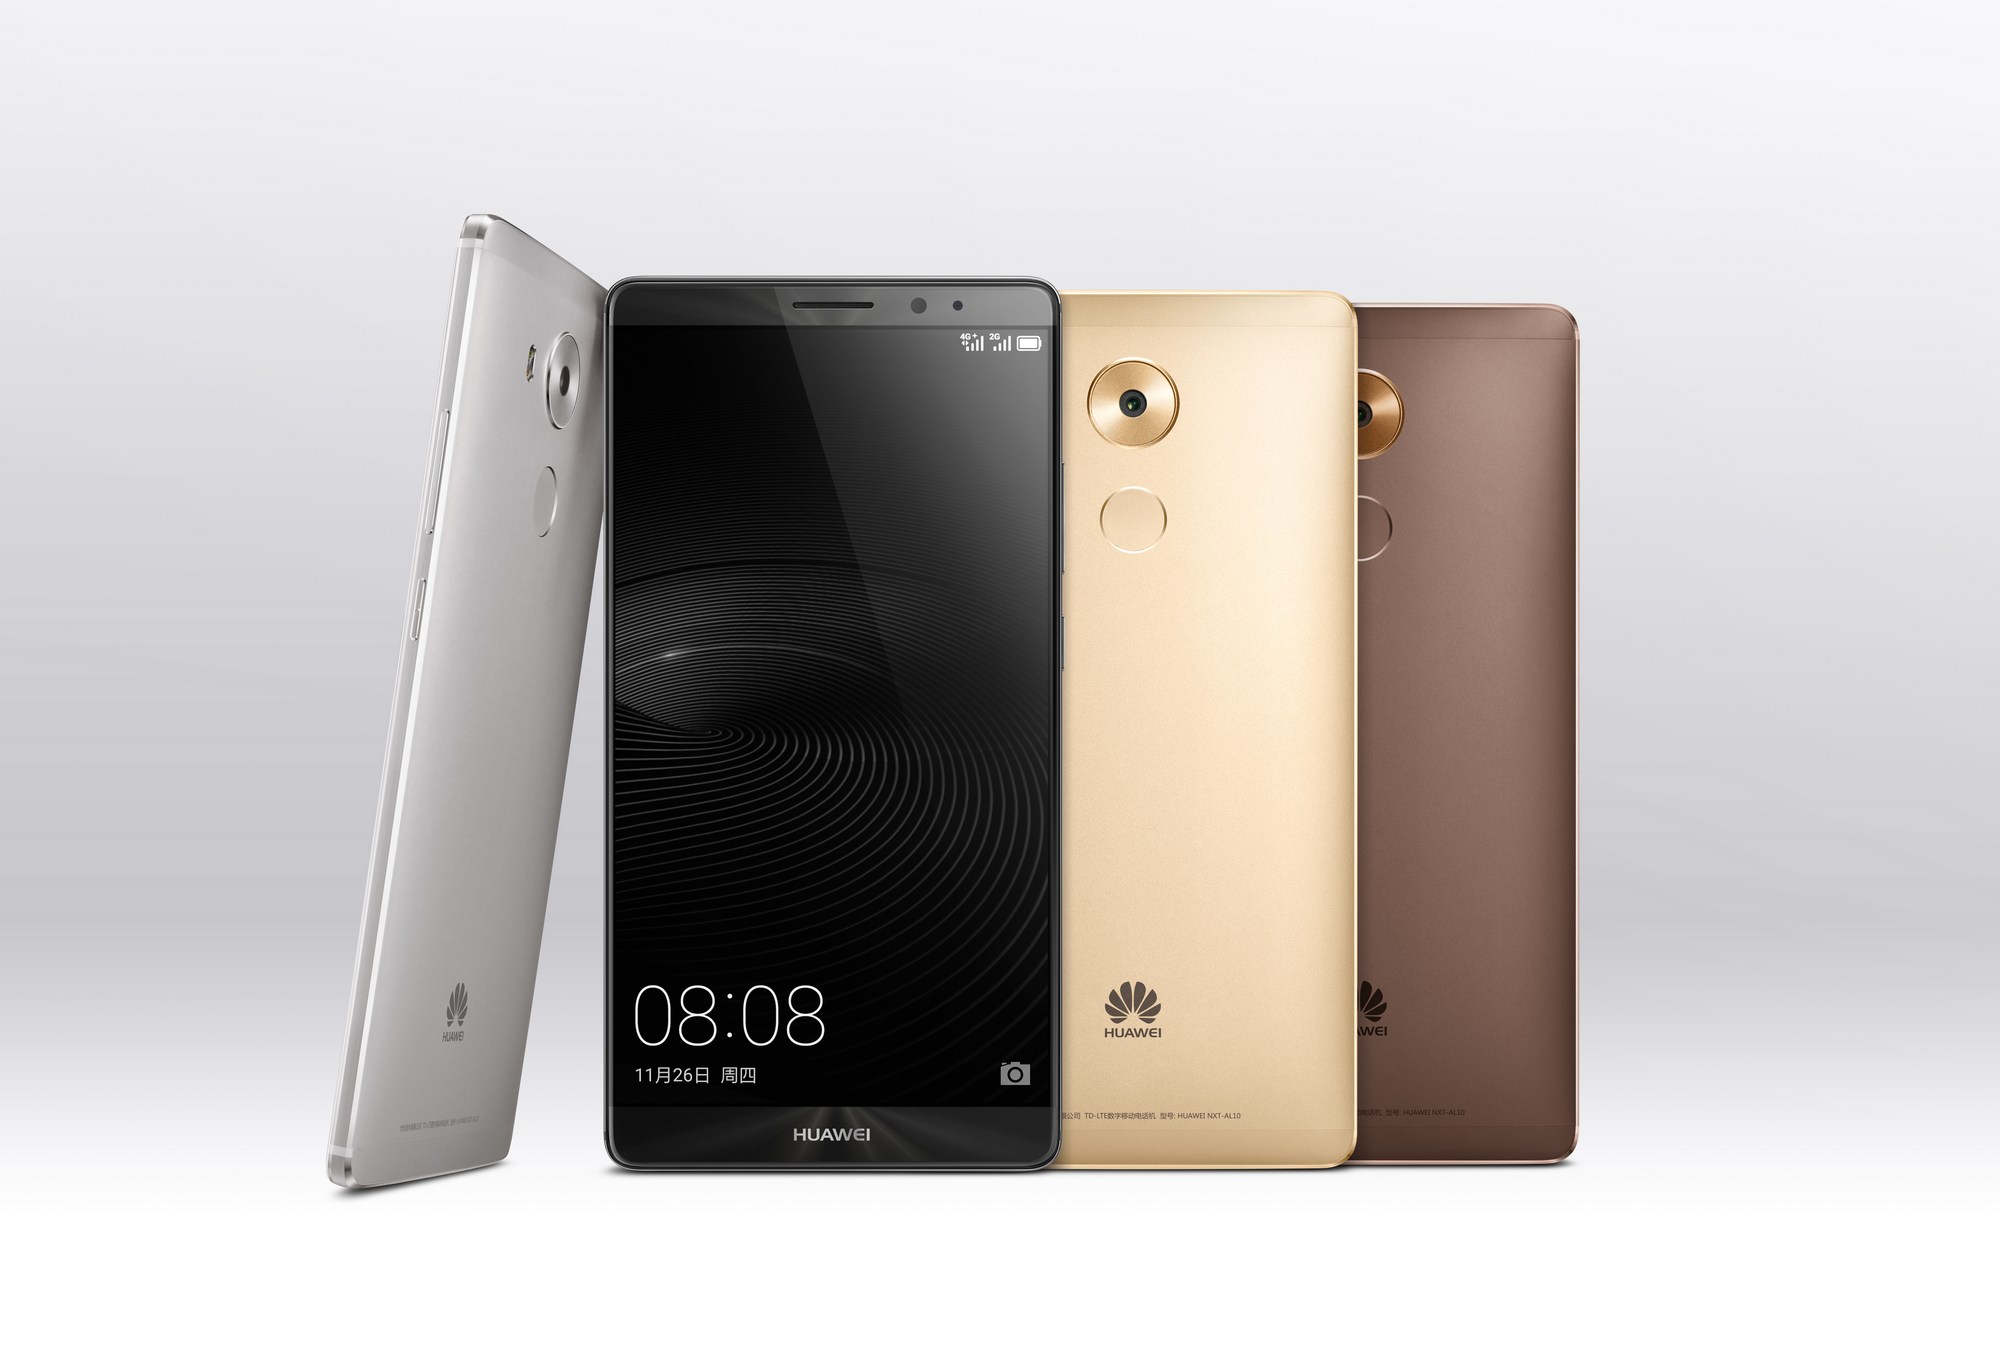 which-network-does-the-huawei-mate-run-on